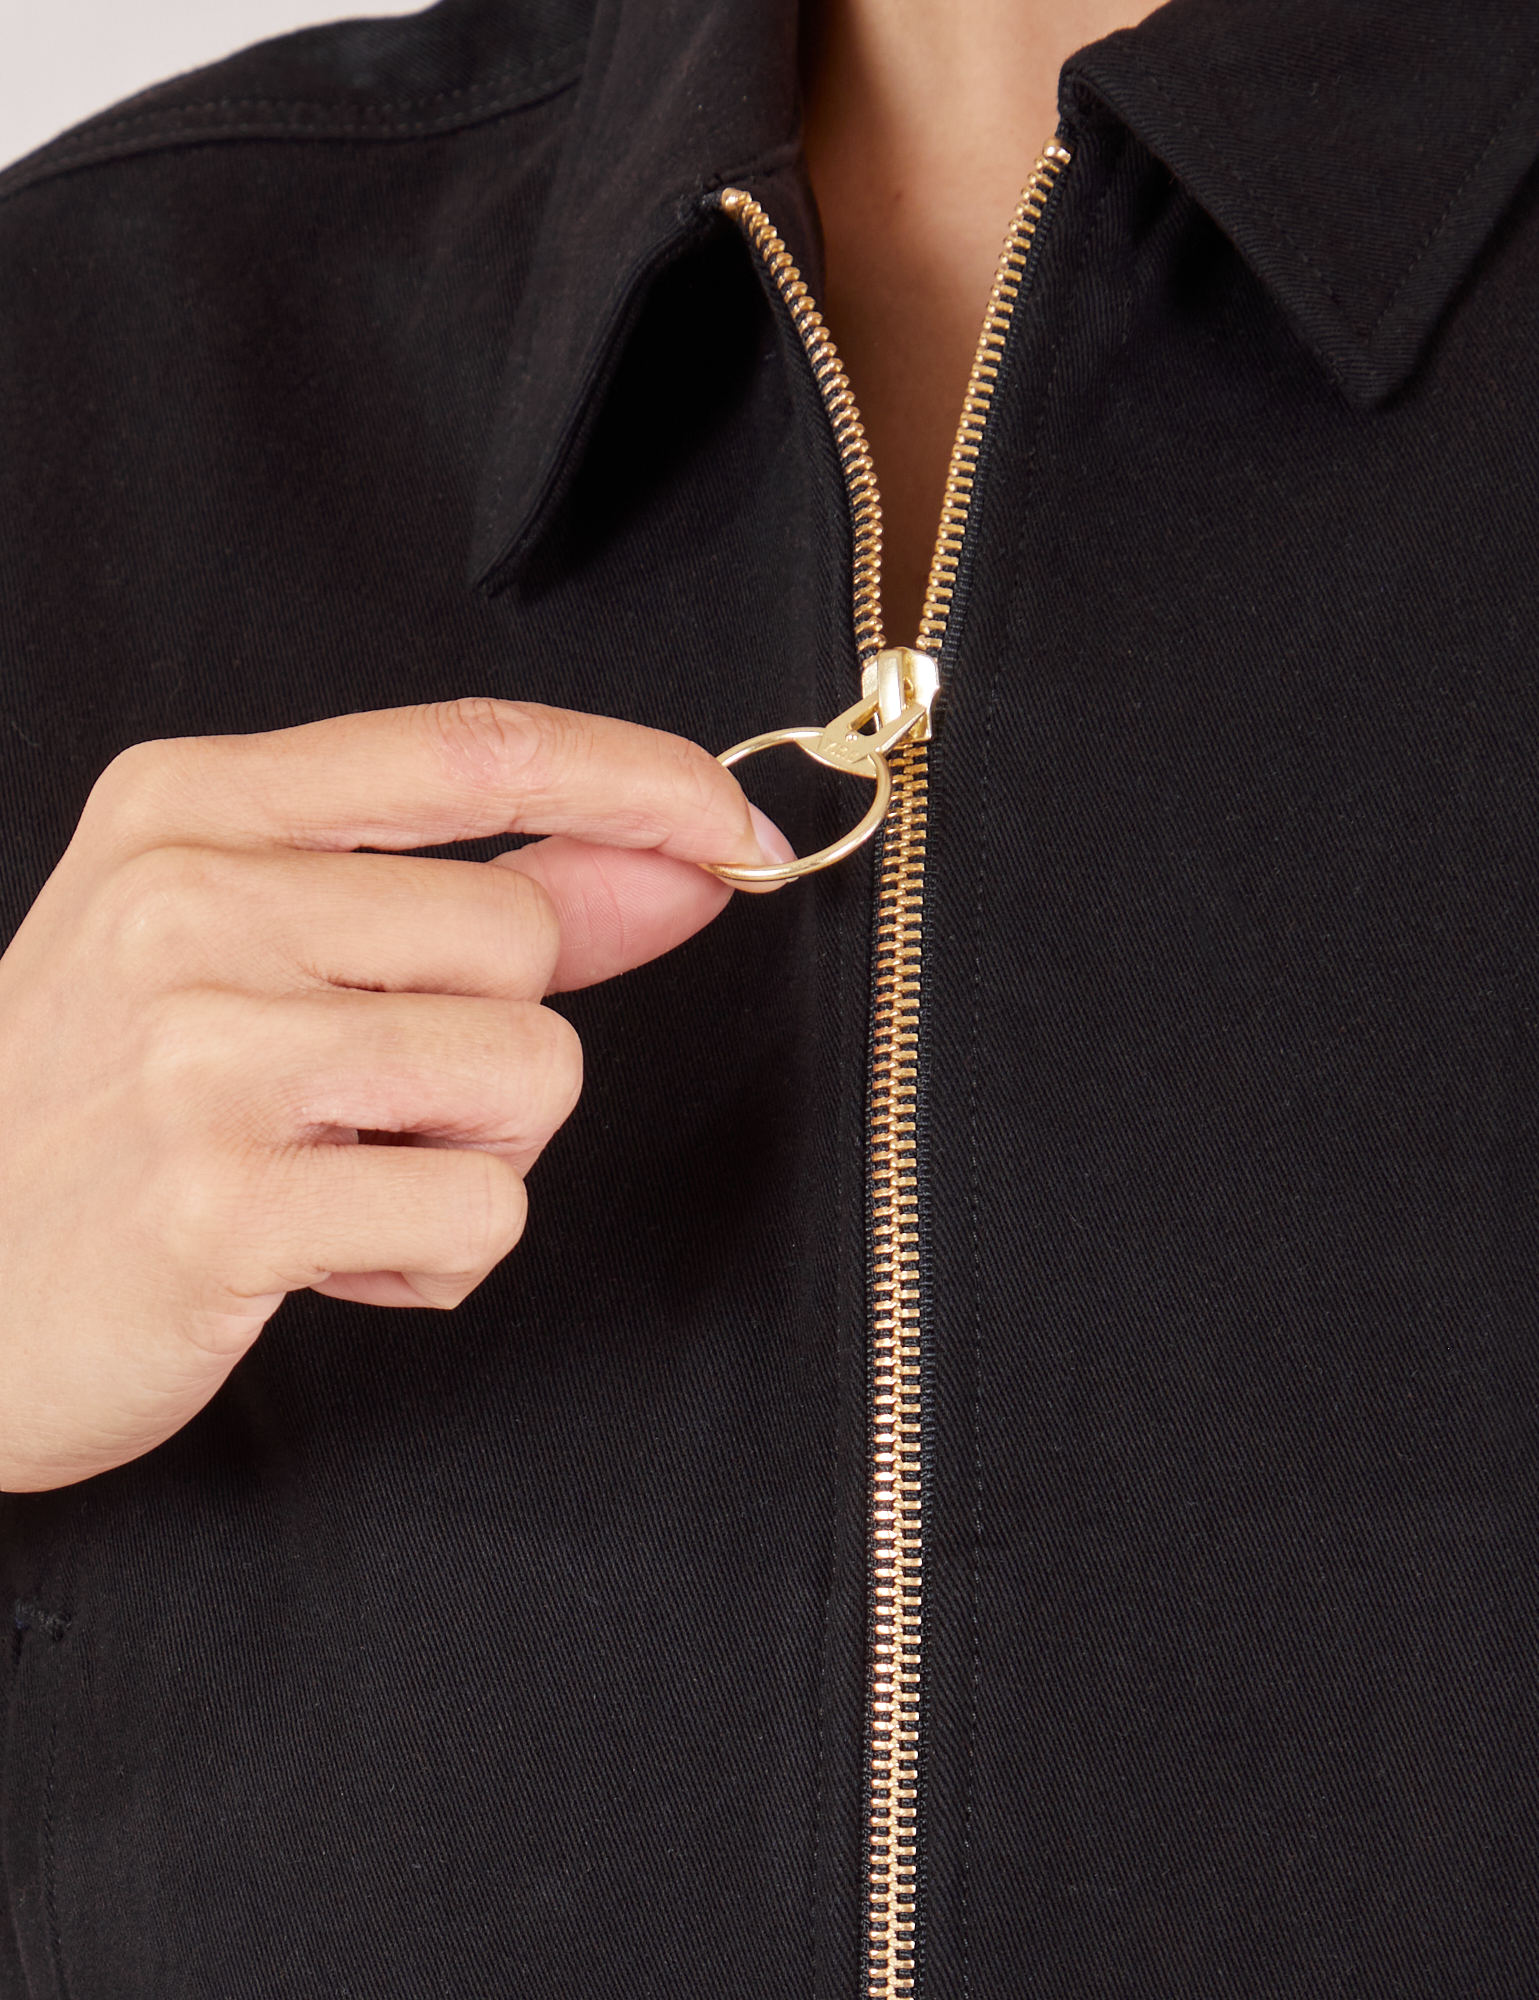 Ricky Jacket in Basic Black front close up. Tiara is pulling on the zipper pull ring